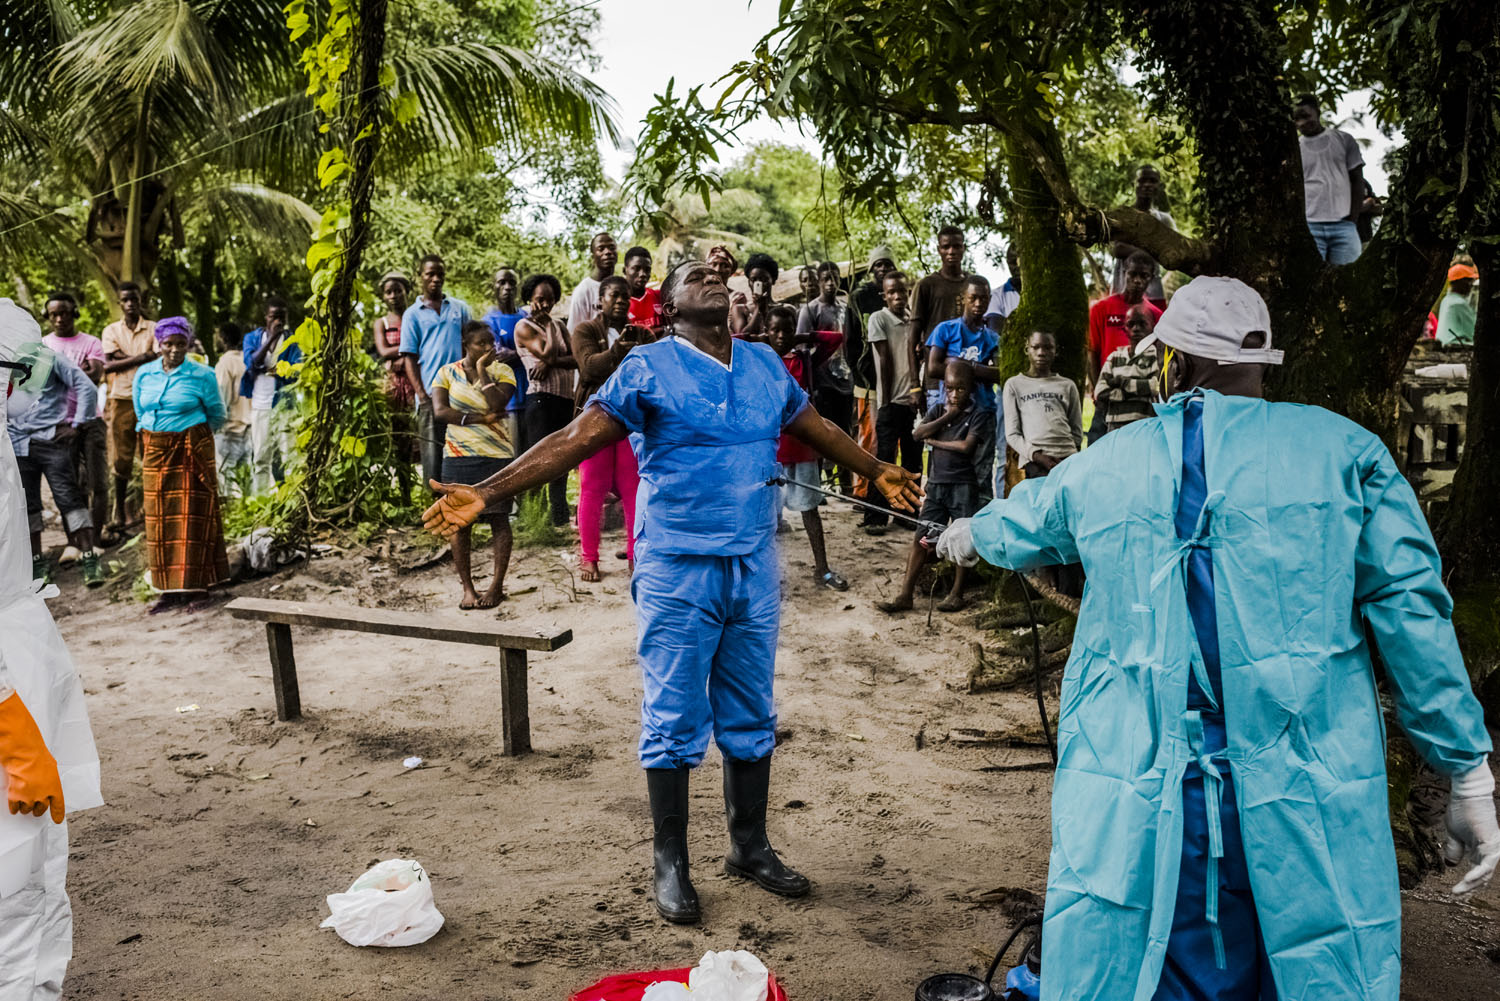 A member of a Liberian Red Cross burial team is disinfected, with chlorine sprayed on by a colleague, after having removed the body of a man, a suspected Ebola victim from his home on Sept. 6, 2014 in Monrovia, Liberia.